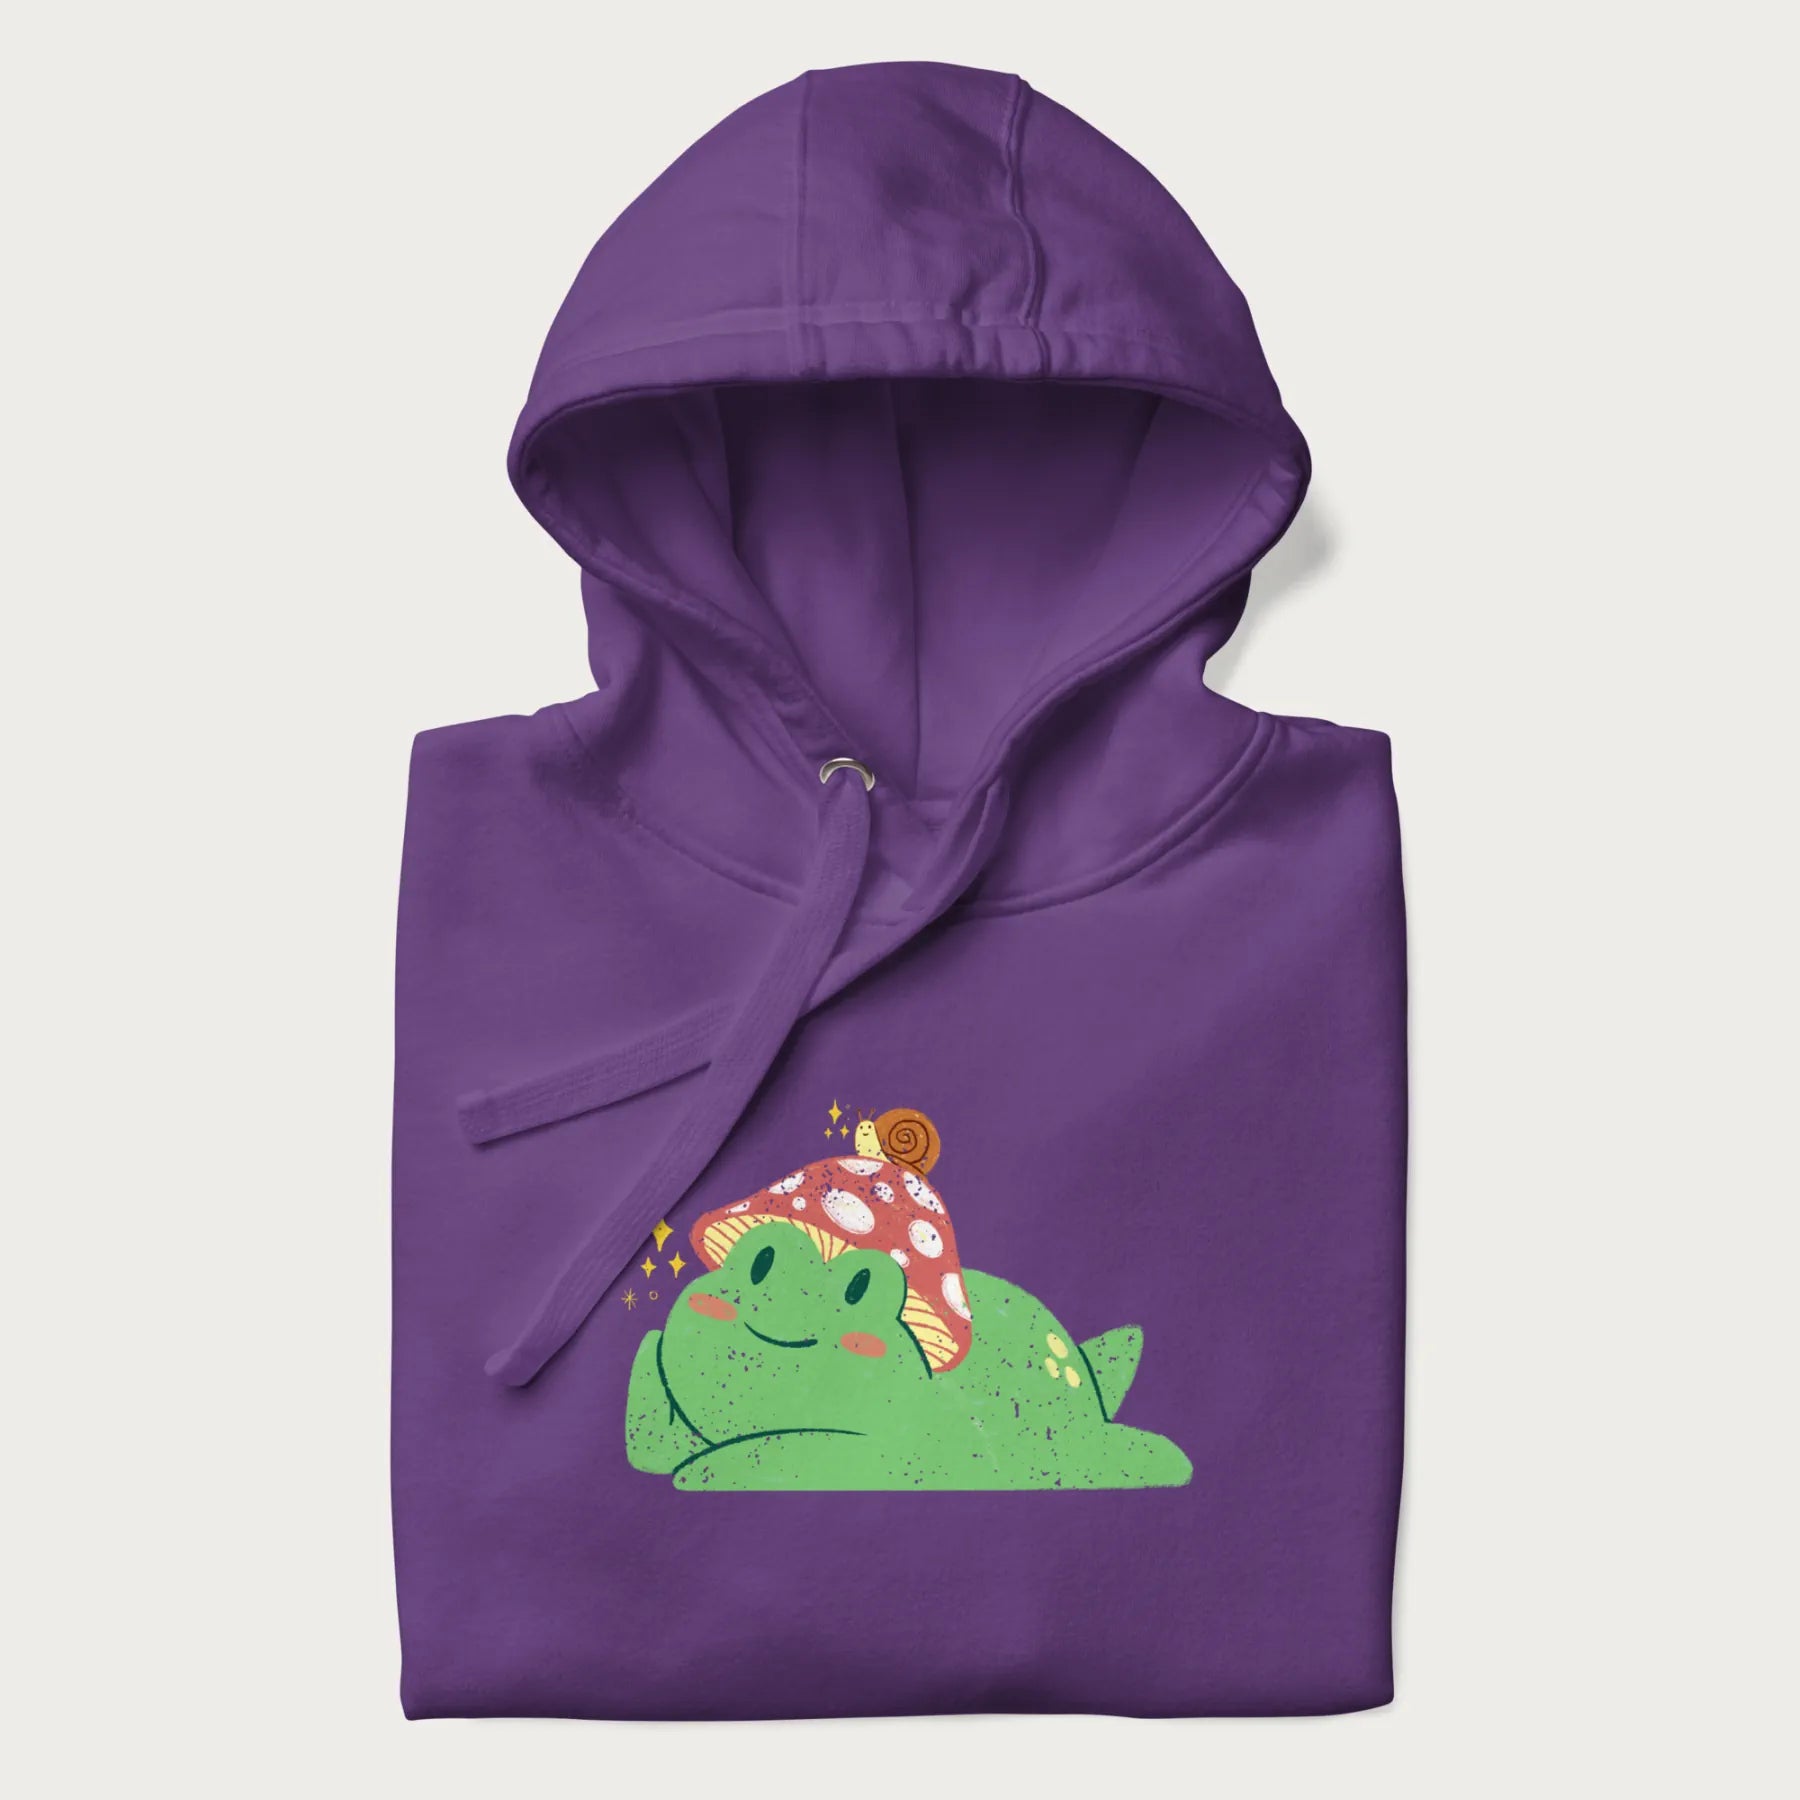 Folded purple hoodie with a cottagecore design of a green frog wearing a mushroom cap and a snail on top.